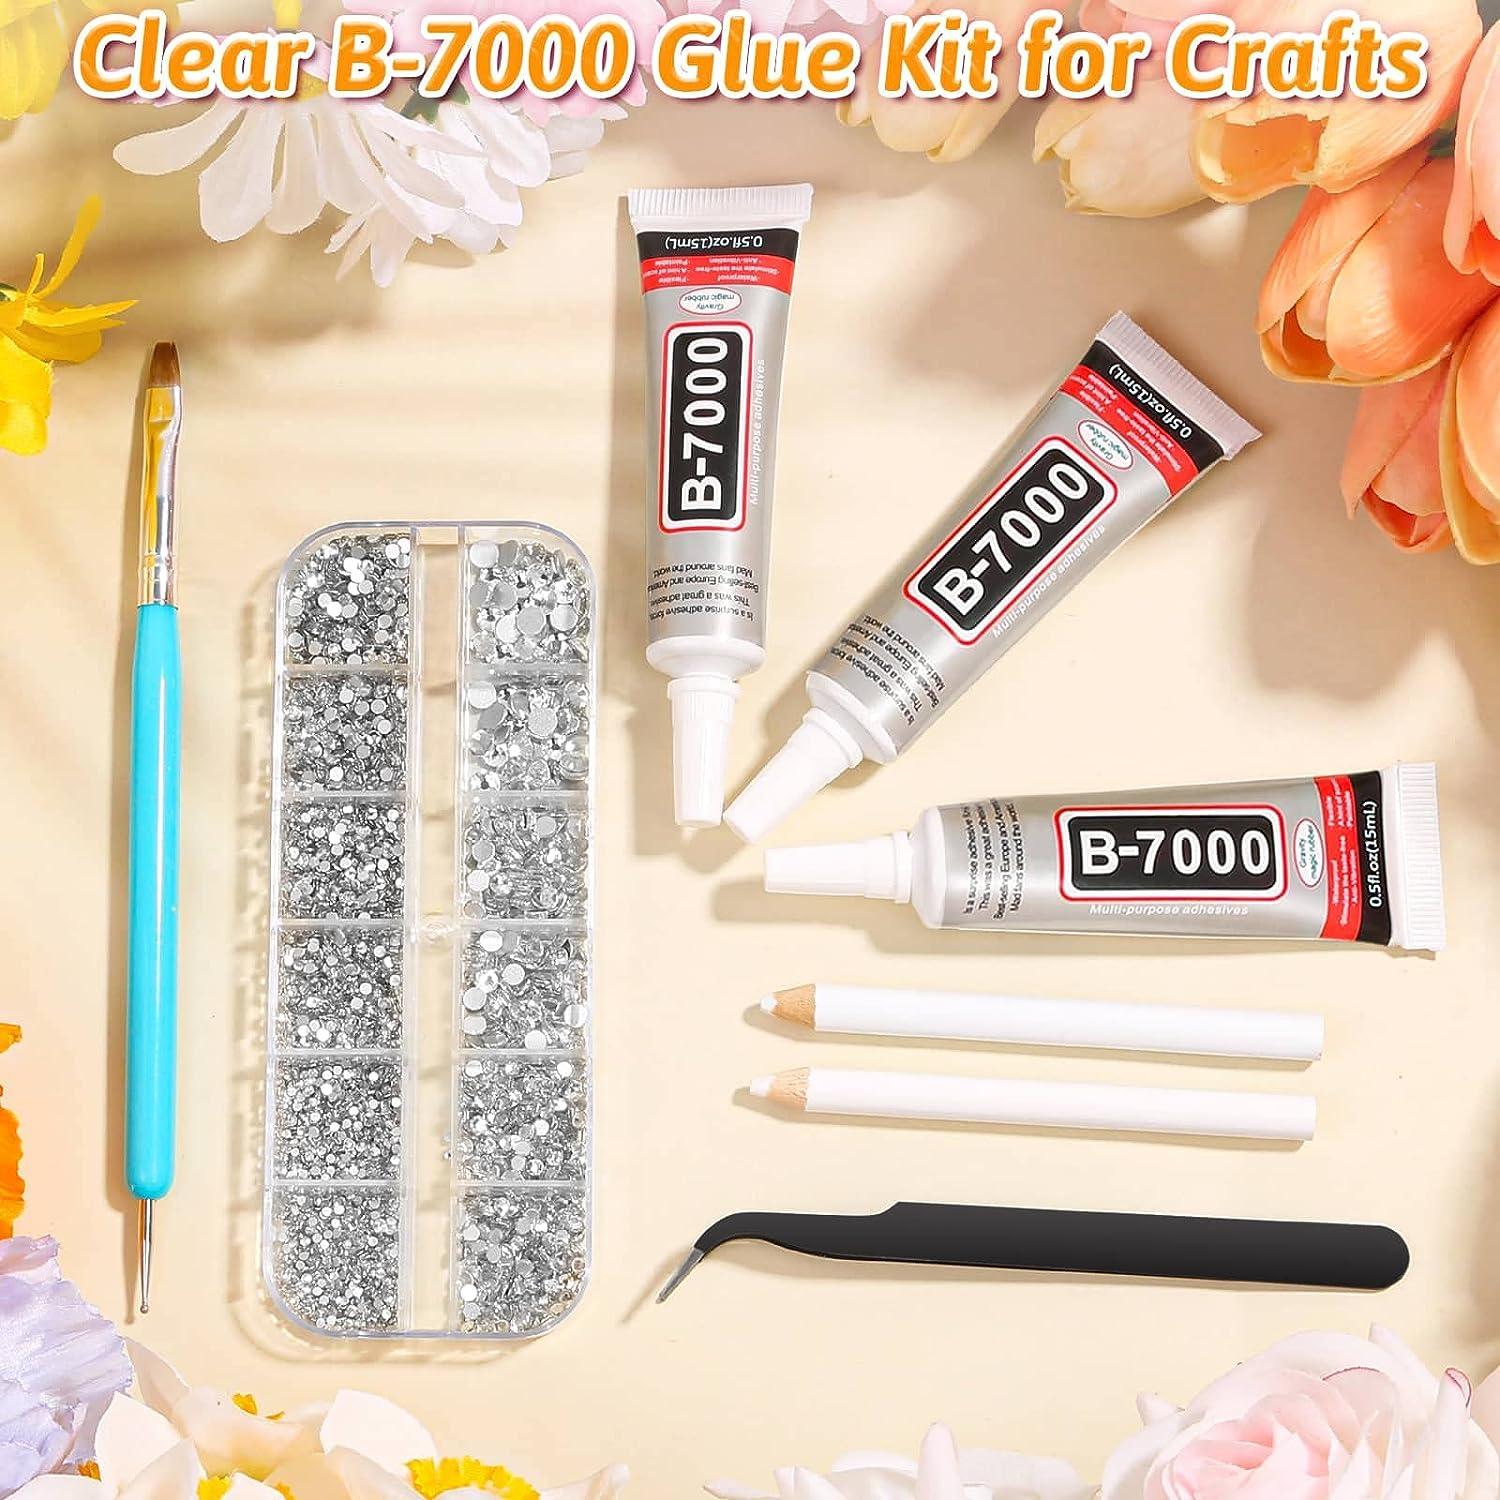  B 7000 Clear Glue with Rhinestones Craft Kit, 2 x 110ML B-7000  Adhesive Glue with Nail Gems, Dotting Tools, Brush for DIY Bead Stone  Jewelry Making Fabric Shoes Cloth Photo Charms